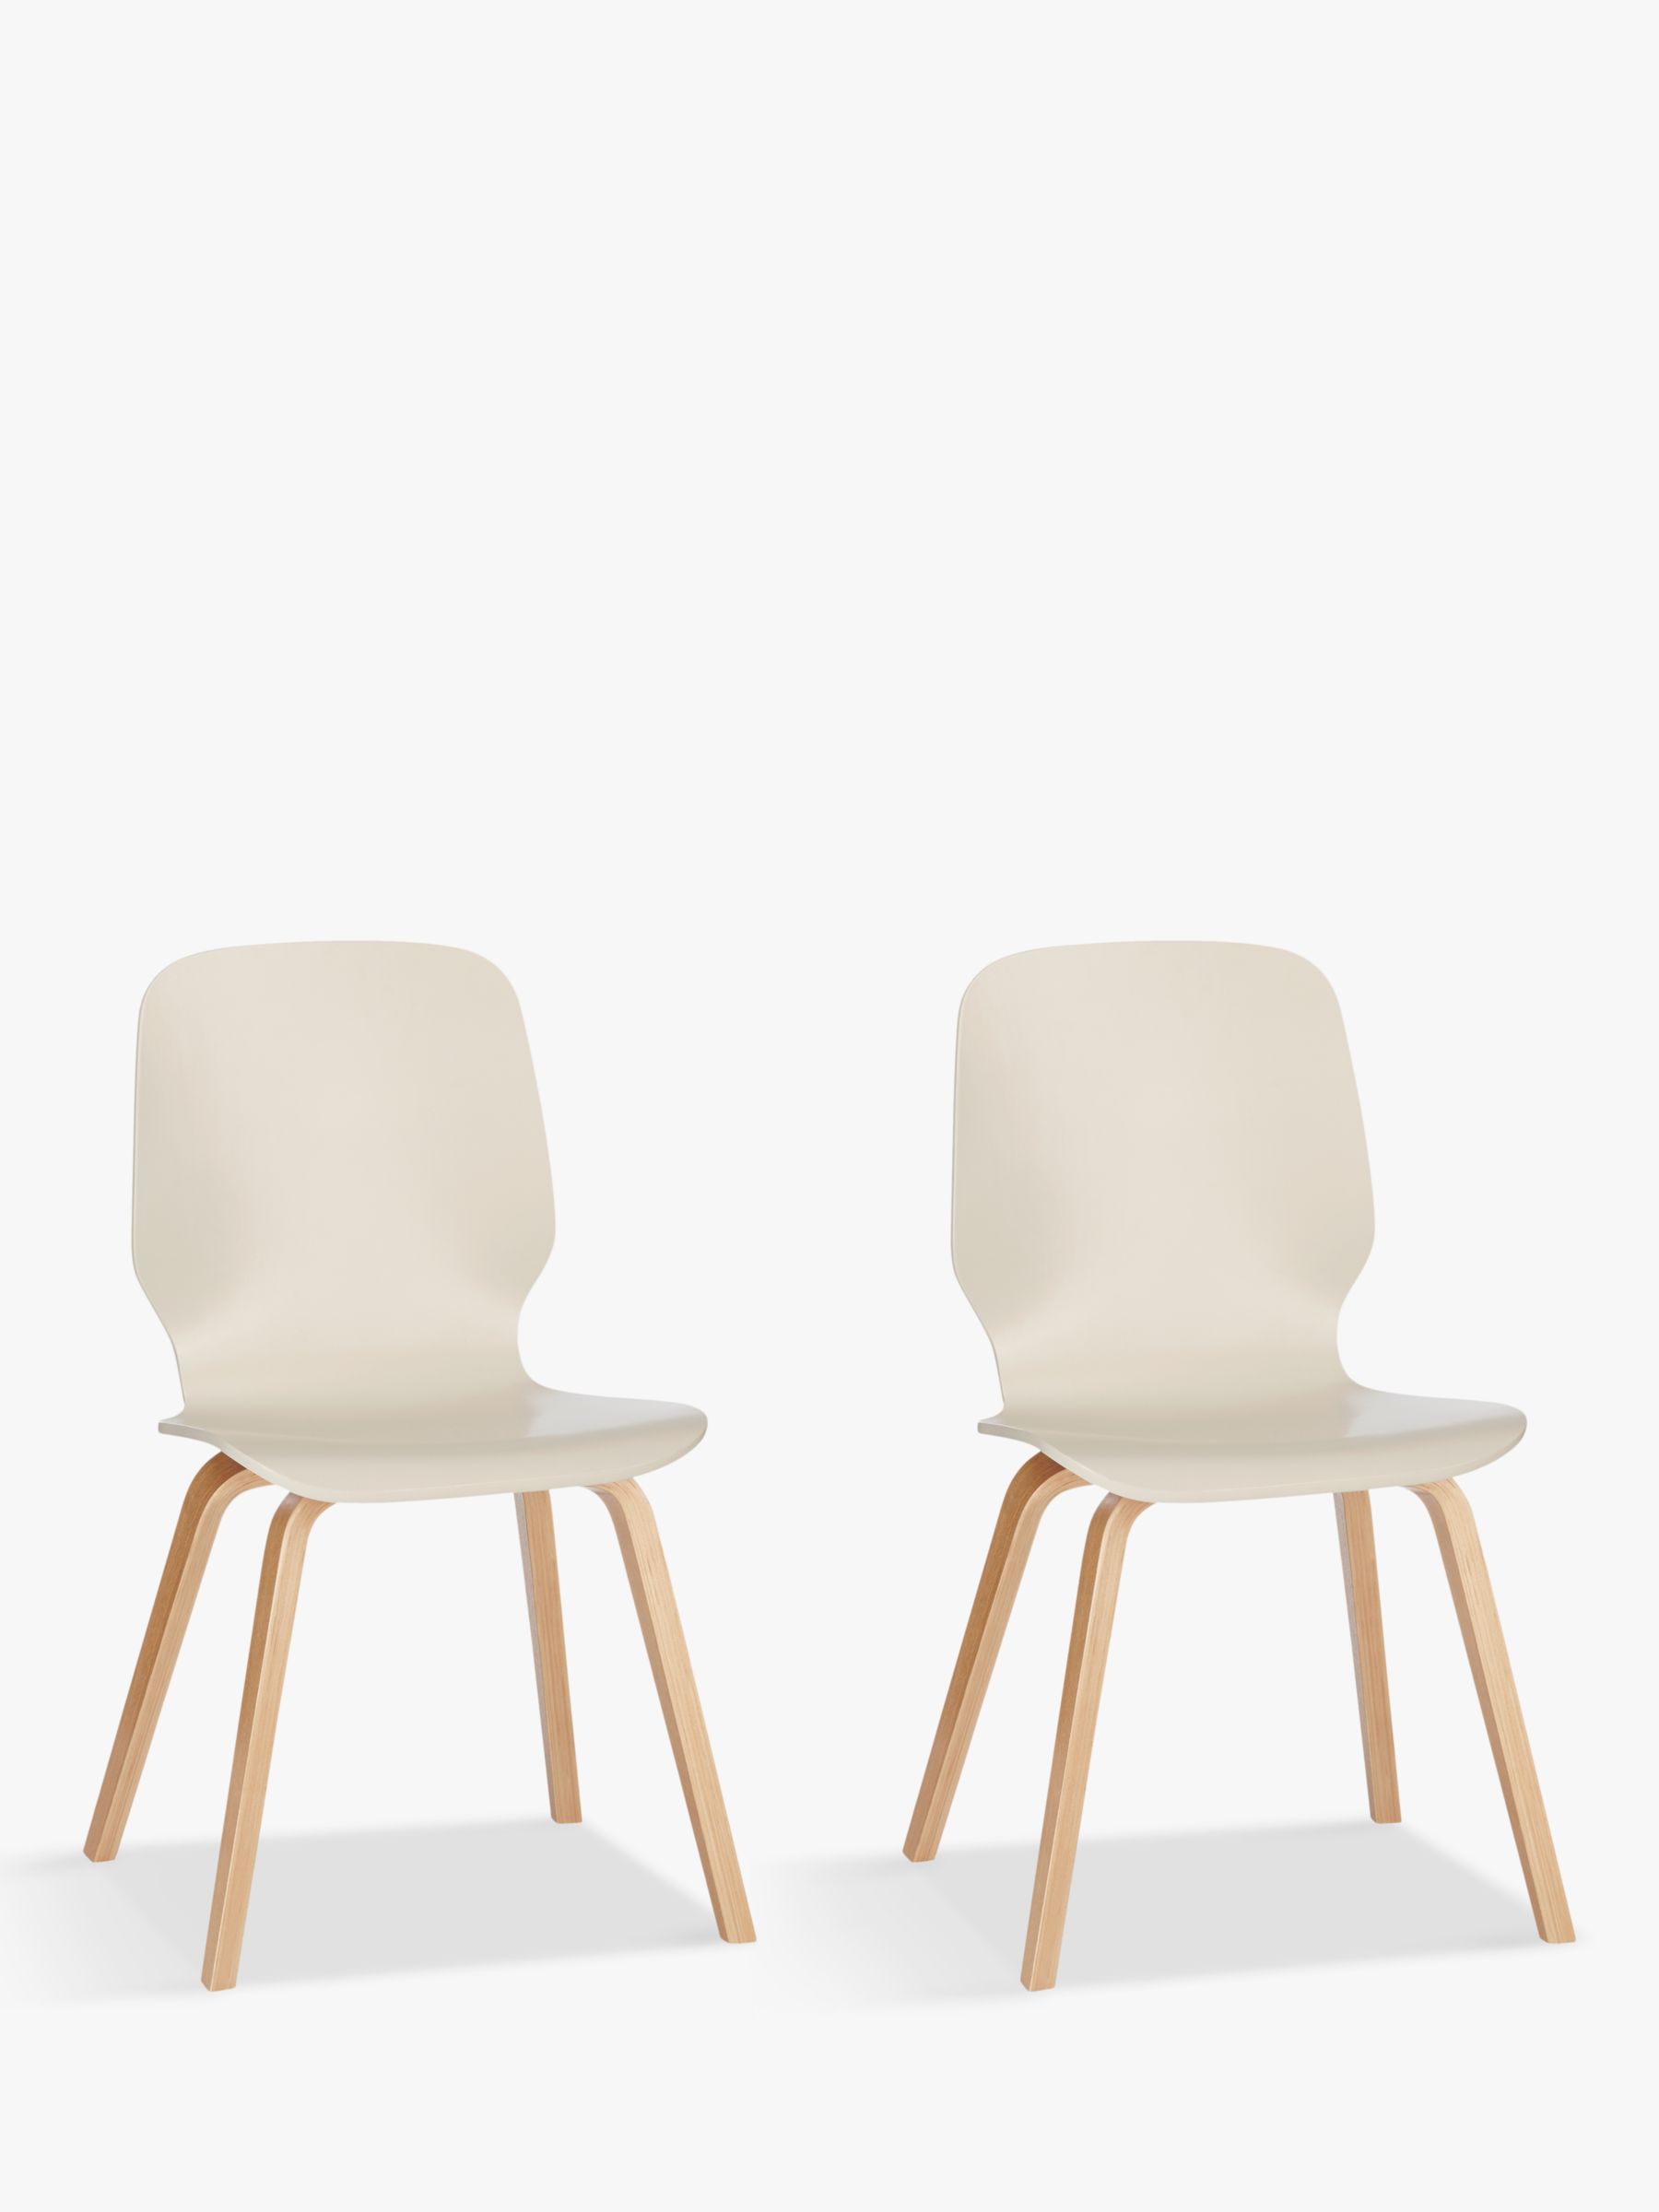 House by John Lewis Anton Dining Chairs, Set of 2